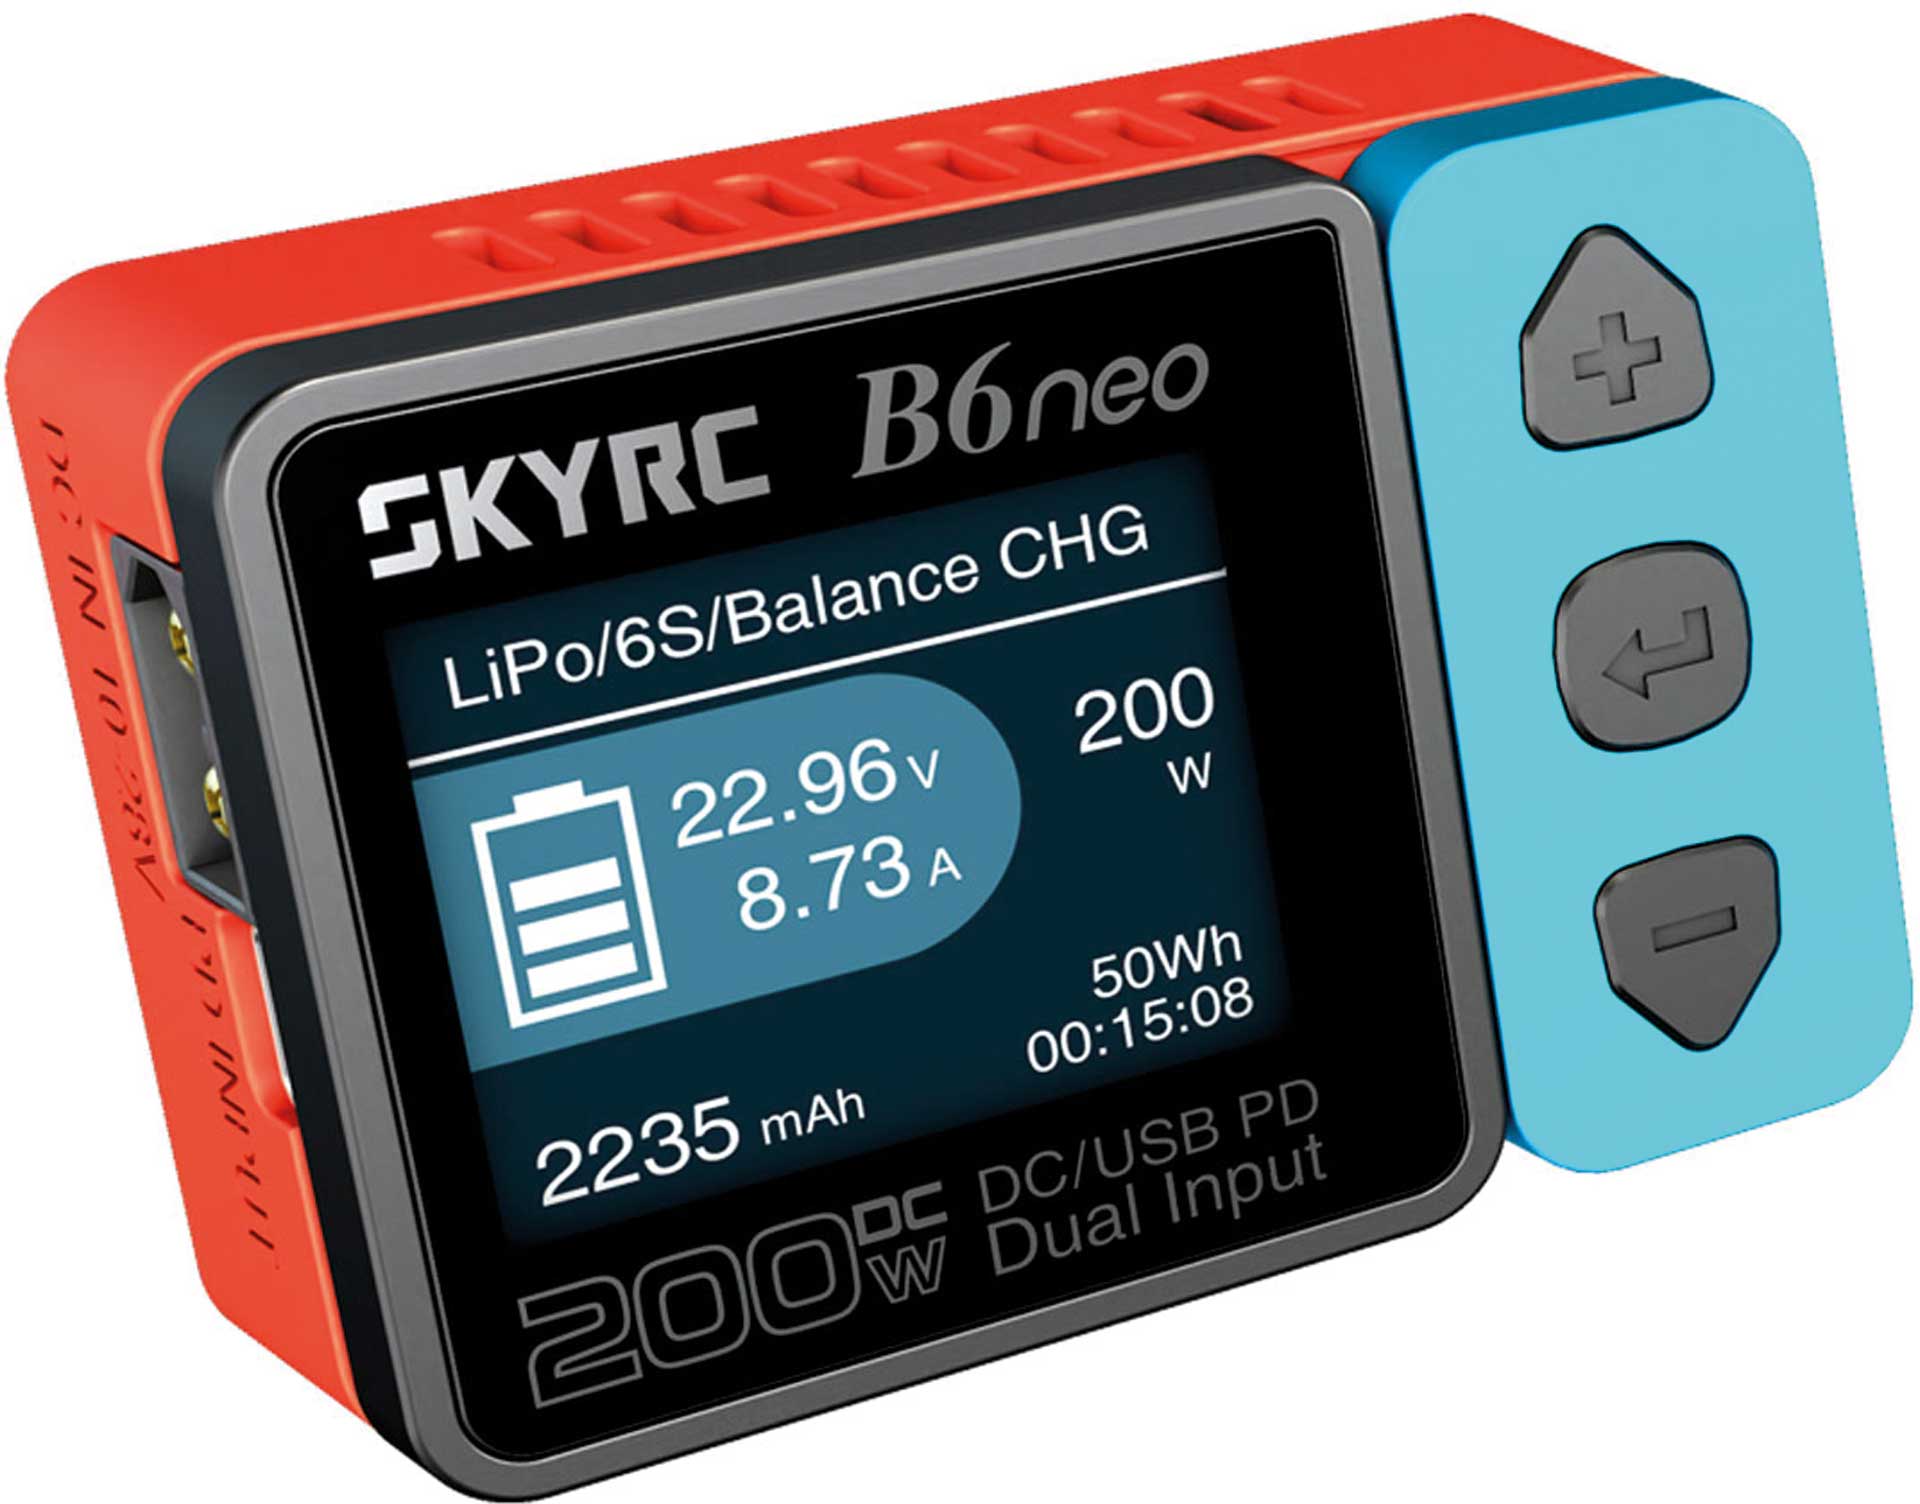 SKYRC B6neo Charger LiPo 1-6s 10A 200W